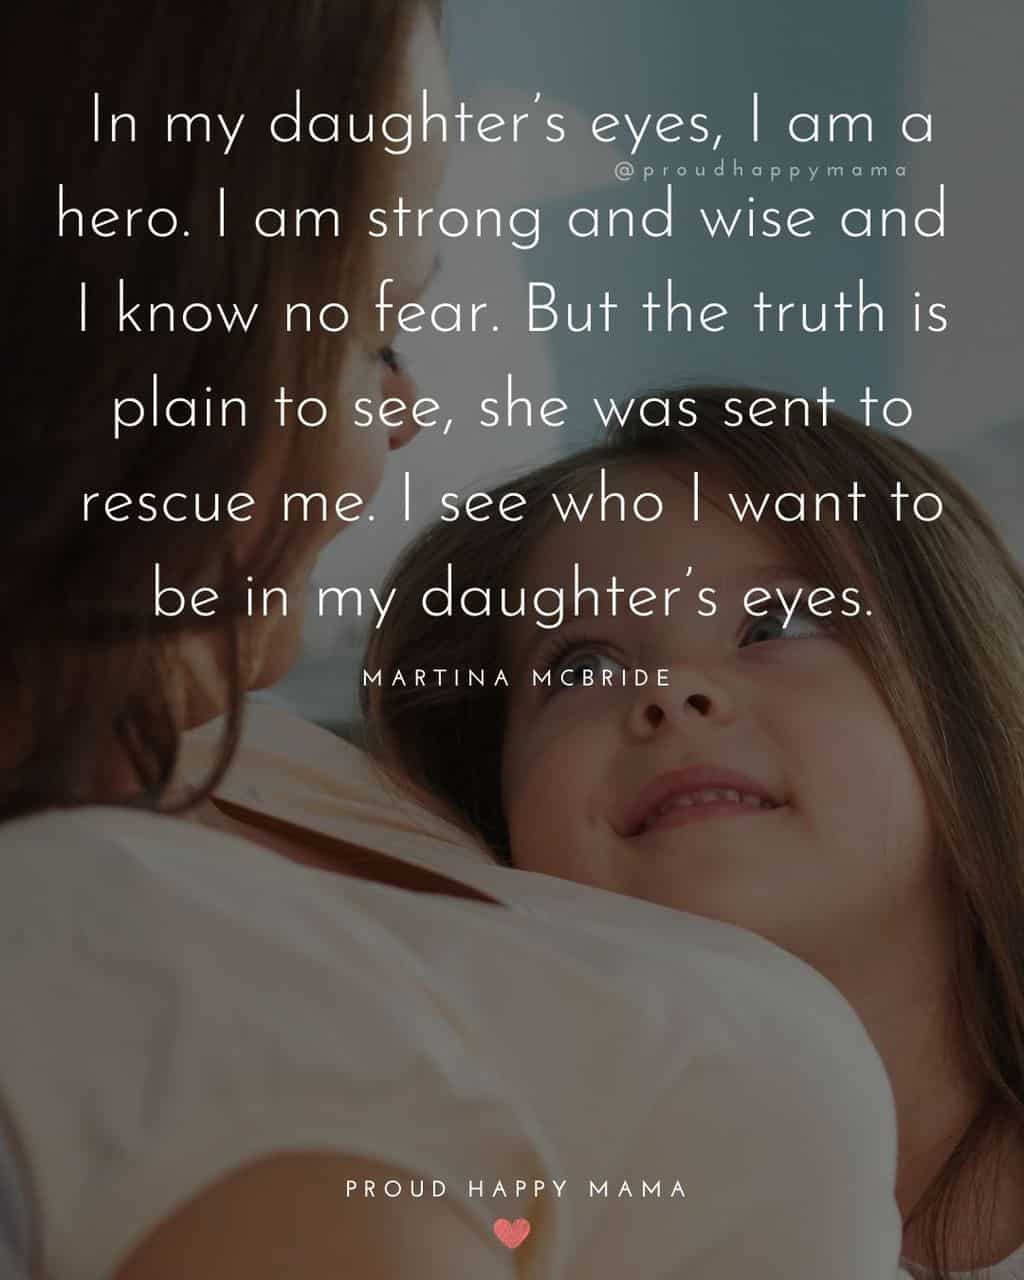 my daughter's happiness quotes - ‘In my daughter’s eyes, I am a hero. I am strong and wise and I know no fear. But the truth is plain to see, she was sent